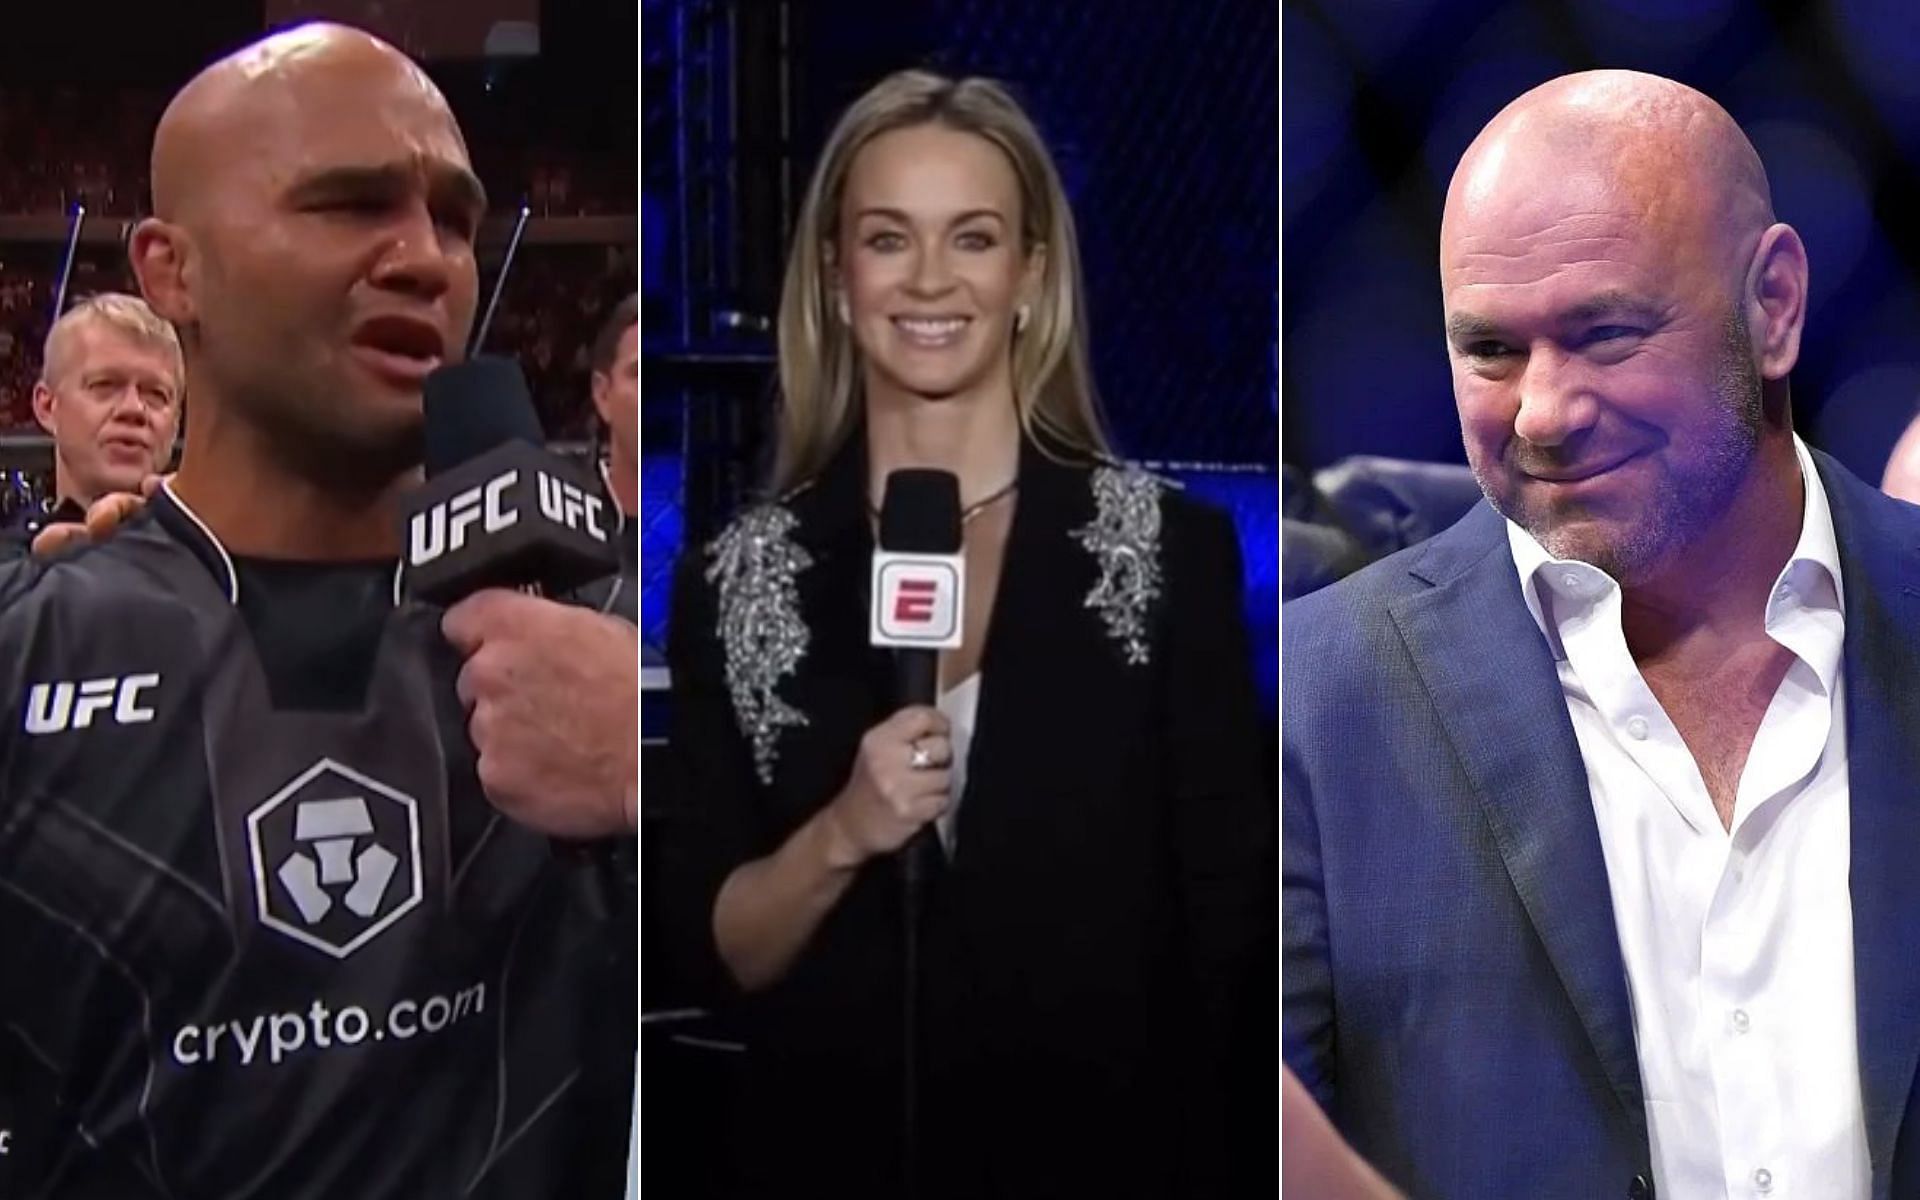 Robbie Lawler [Left], Laura Sanko [Middle], and Dana White [Right] [Photo credit: @ufc and @laura_sanko - Twitter]